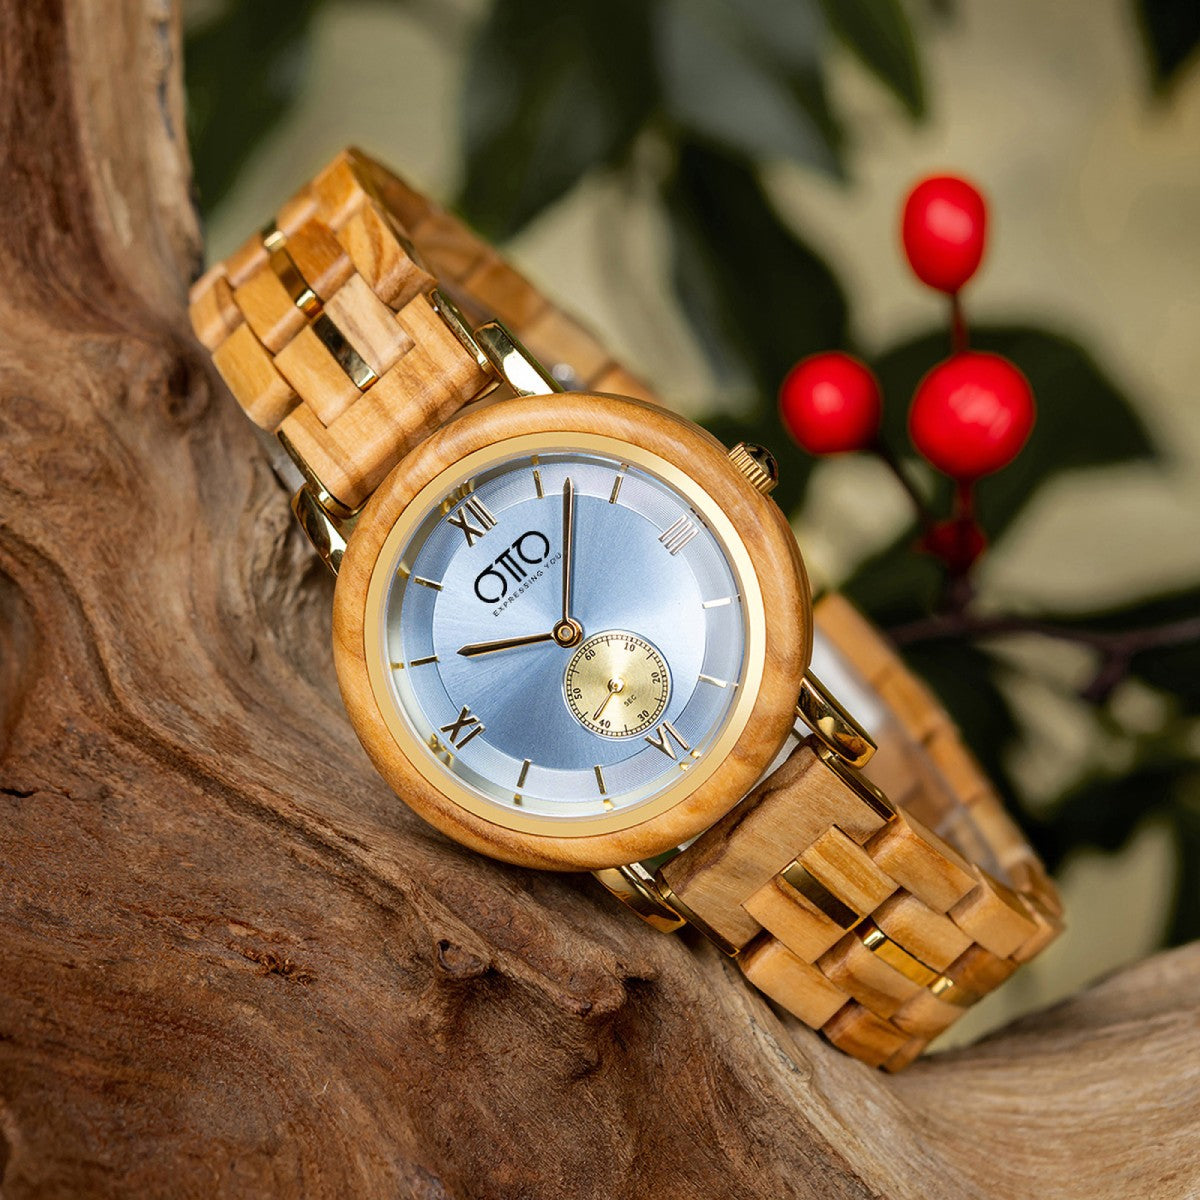 OTTO Wood Watch - Olivewood and Stainless Steel Chronograph Round Dial Wooden Watch - GT126-3A